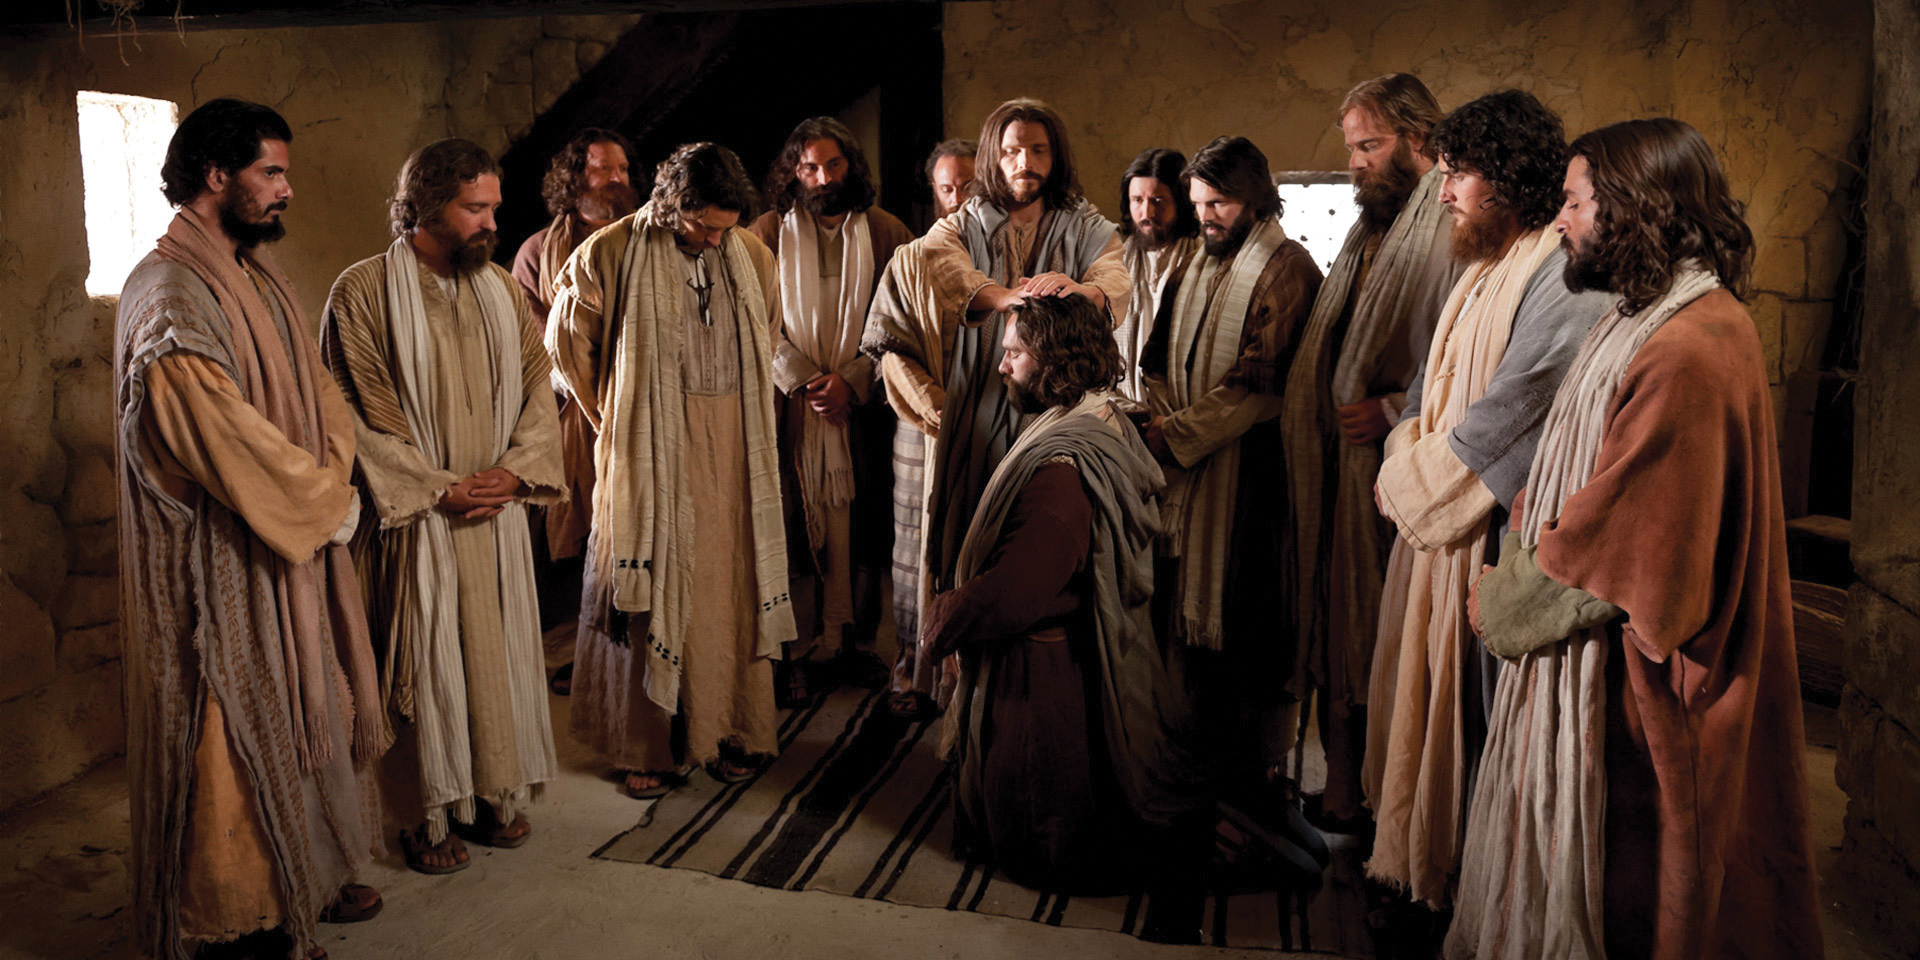 Christ ordains the Apostle Peter, and the other Apostles surround them with their hands folded.